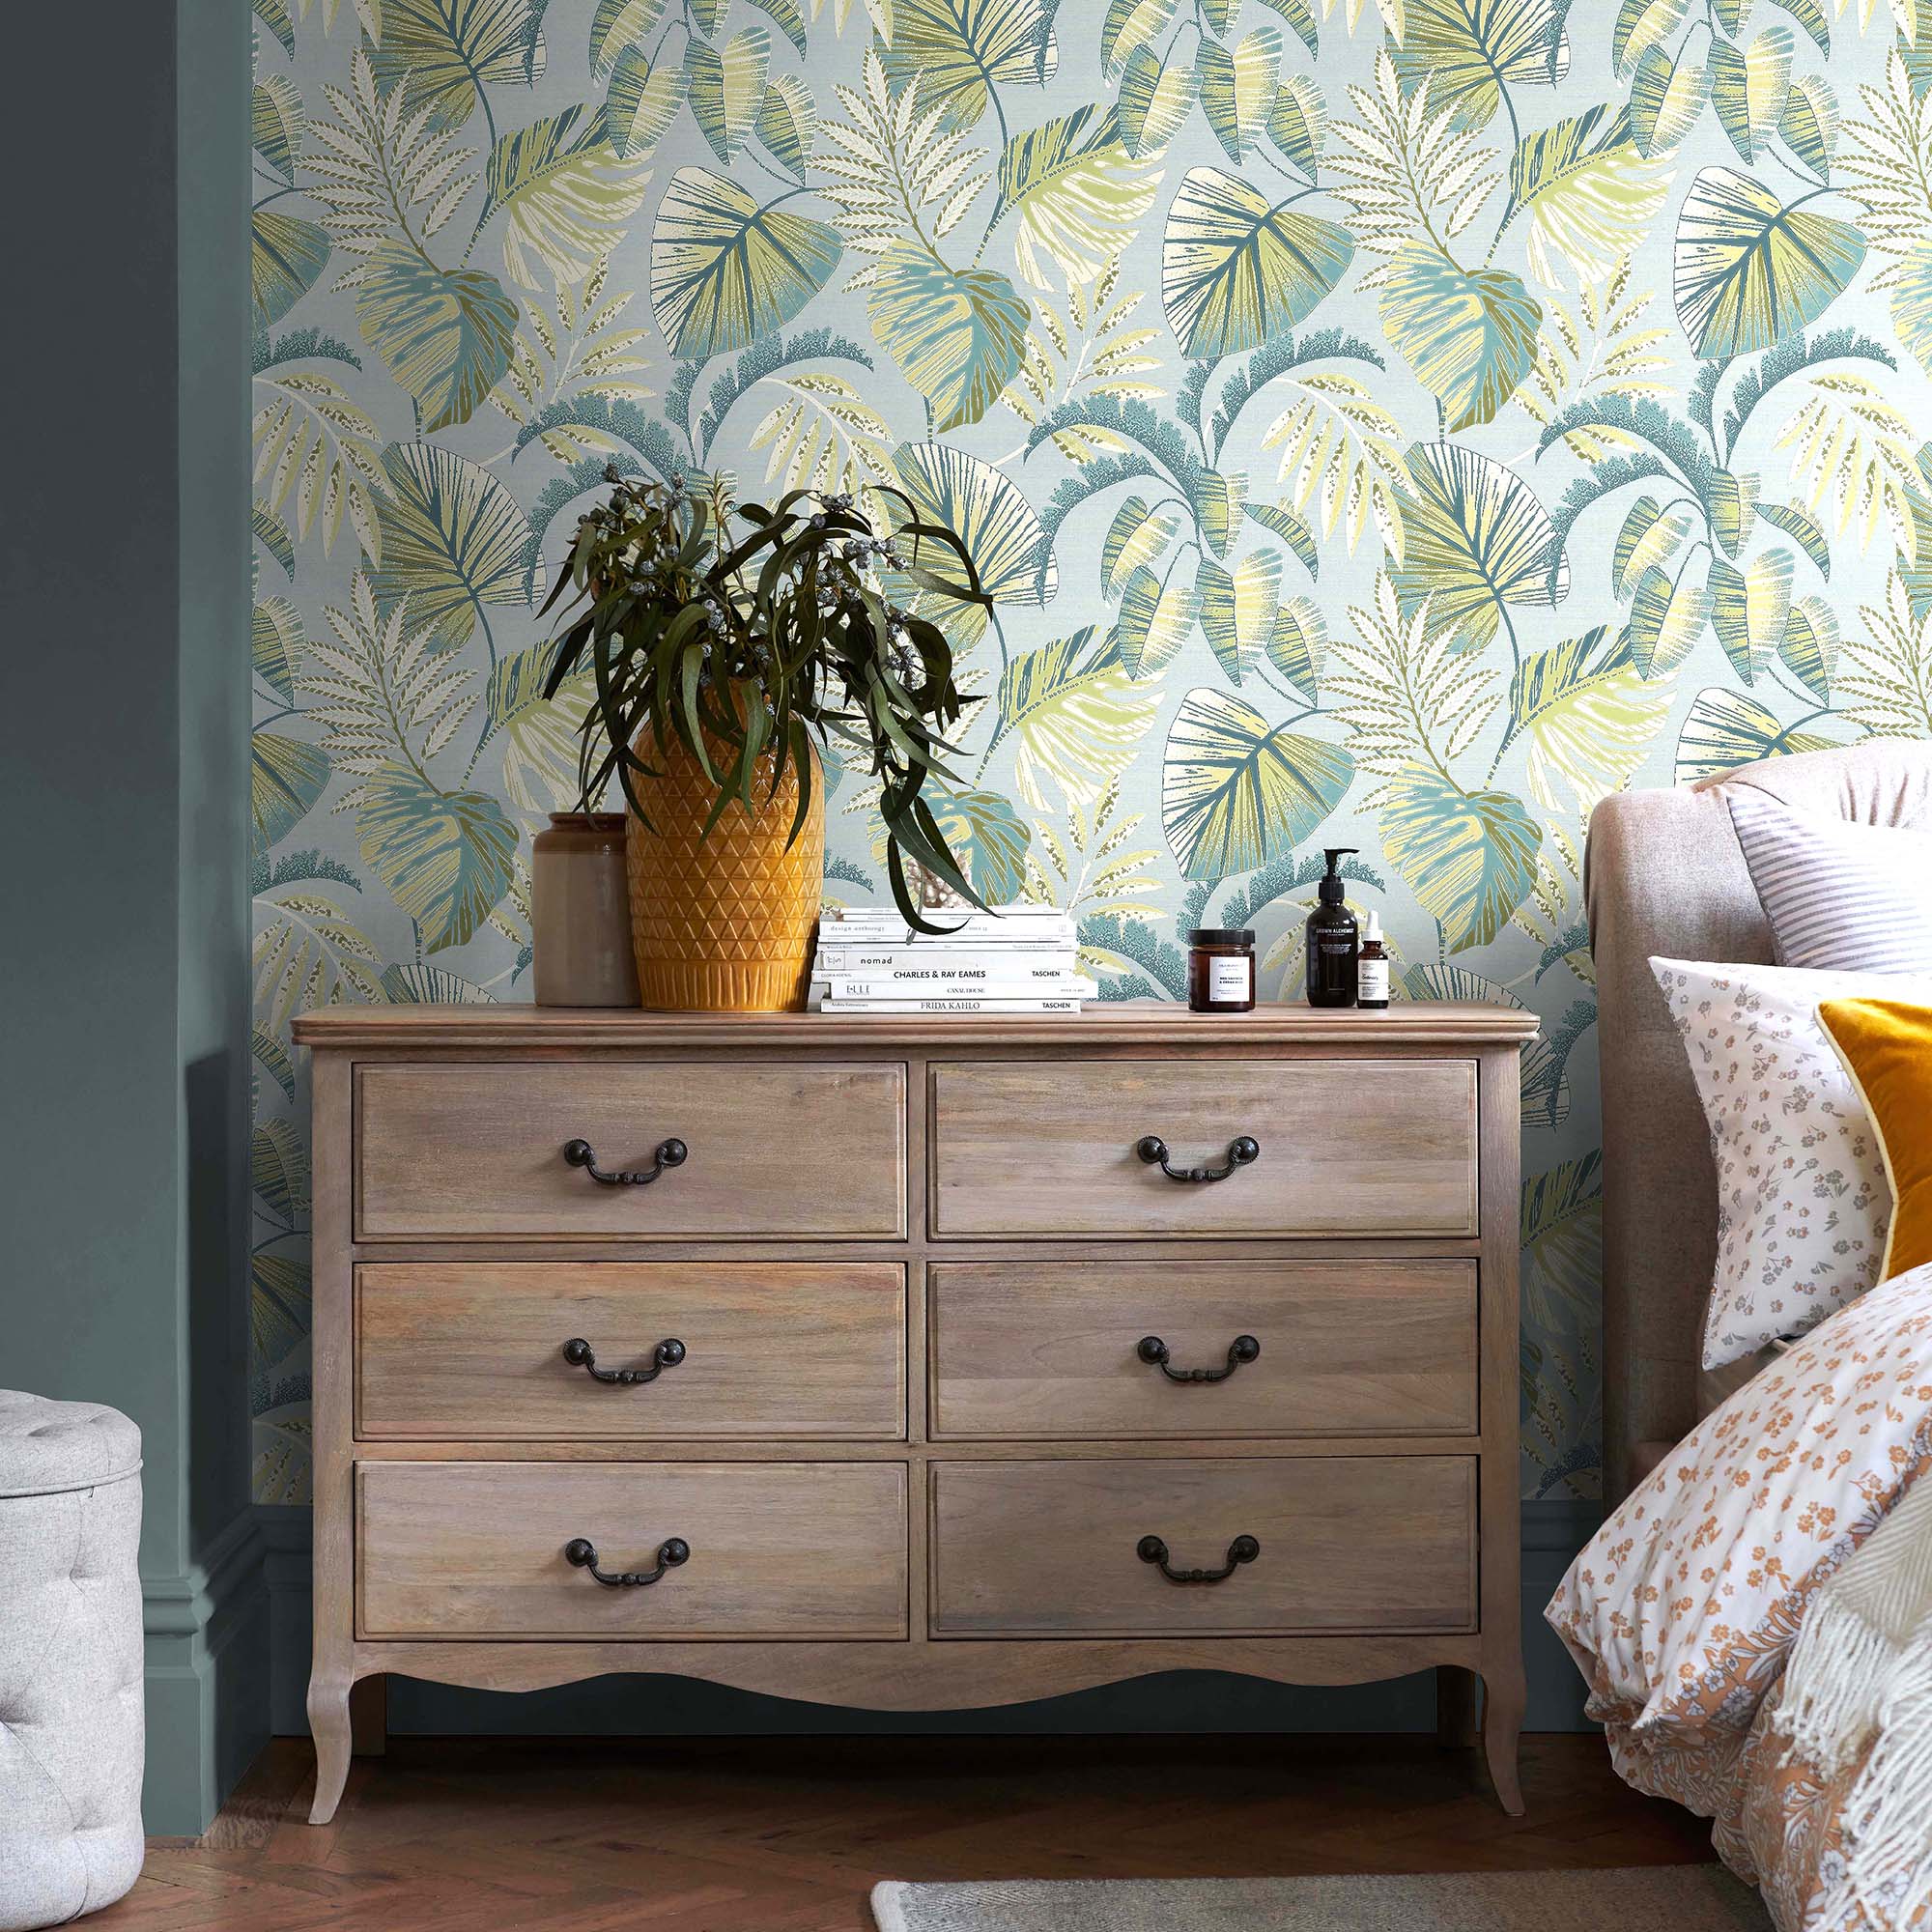 Graham  Brown soft furnishings launches with range of made to measure  products  Painting and Decorating Association